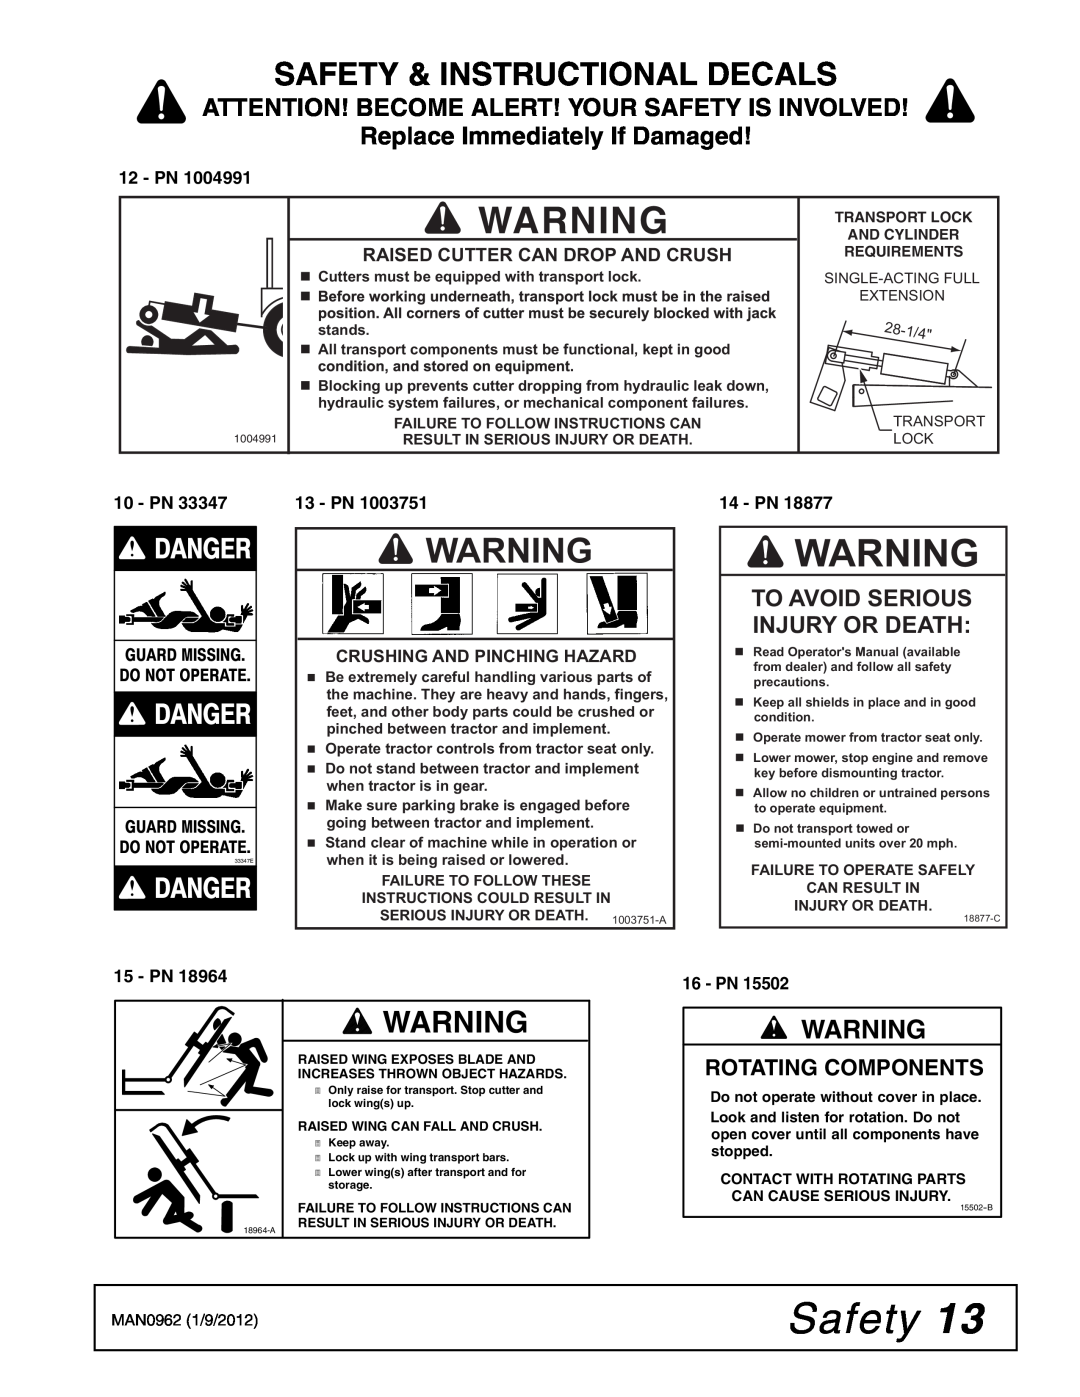 Woods Equipment BW126XQ Safety & Instructional Decals, 33347E, Attention! Become Alert! Your Safety Is Involved, Pn 